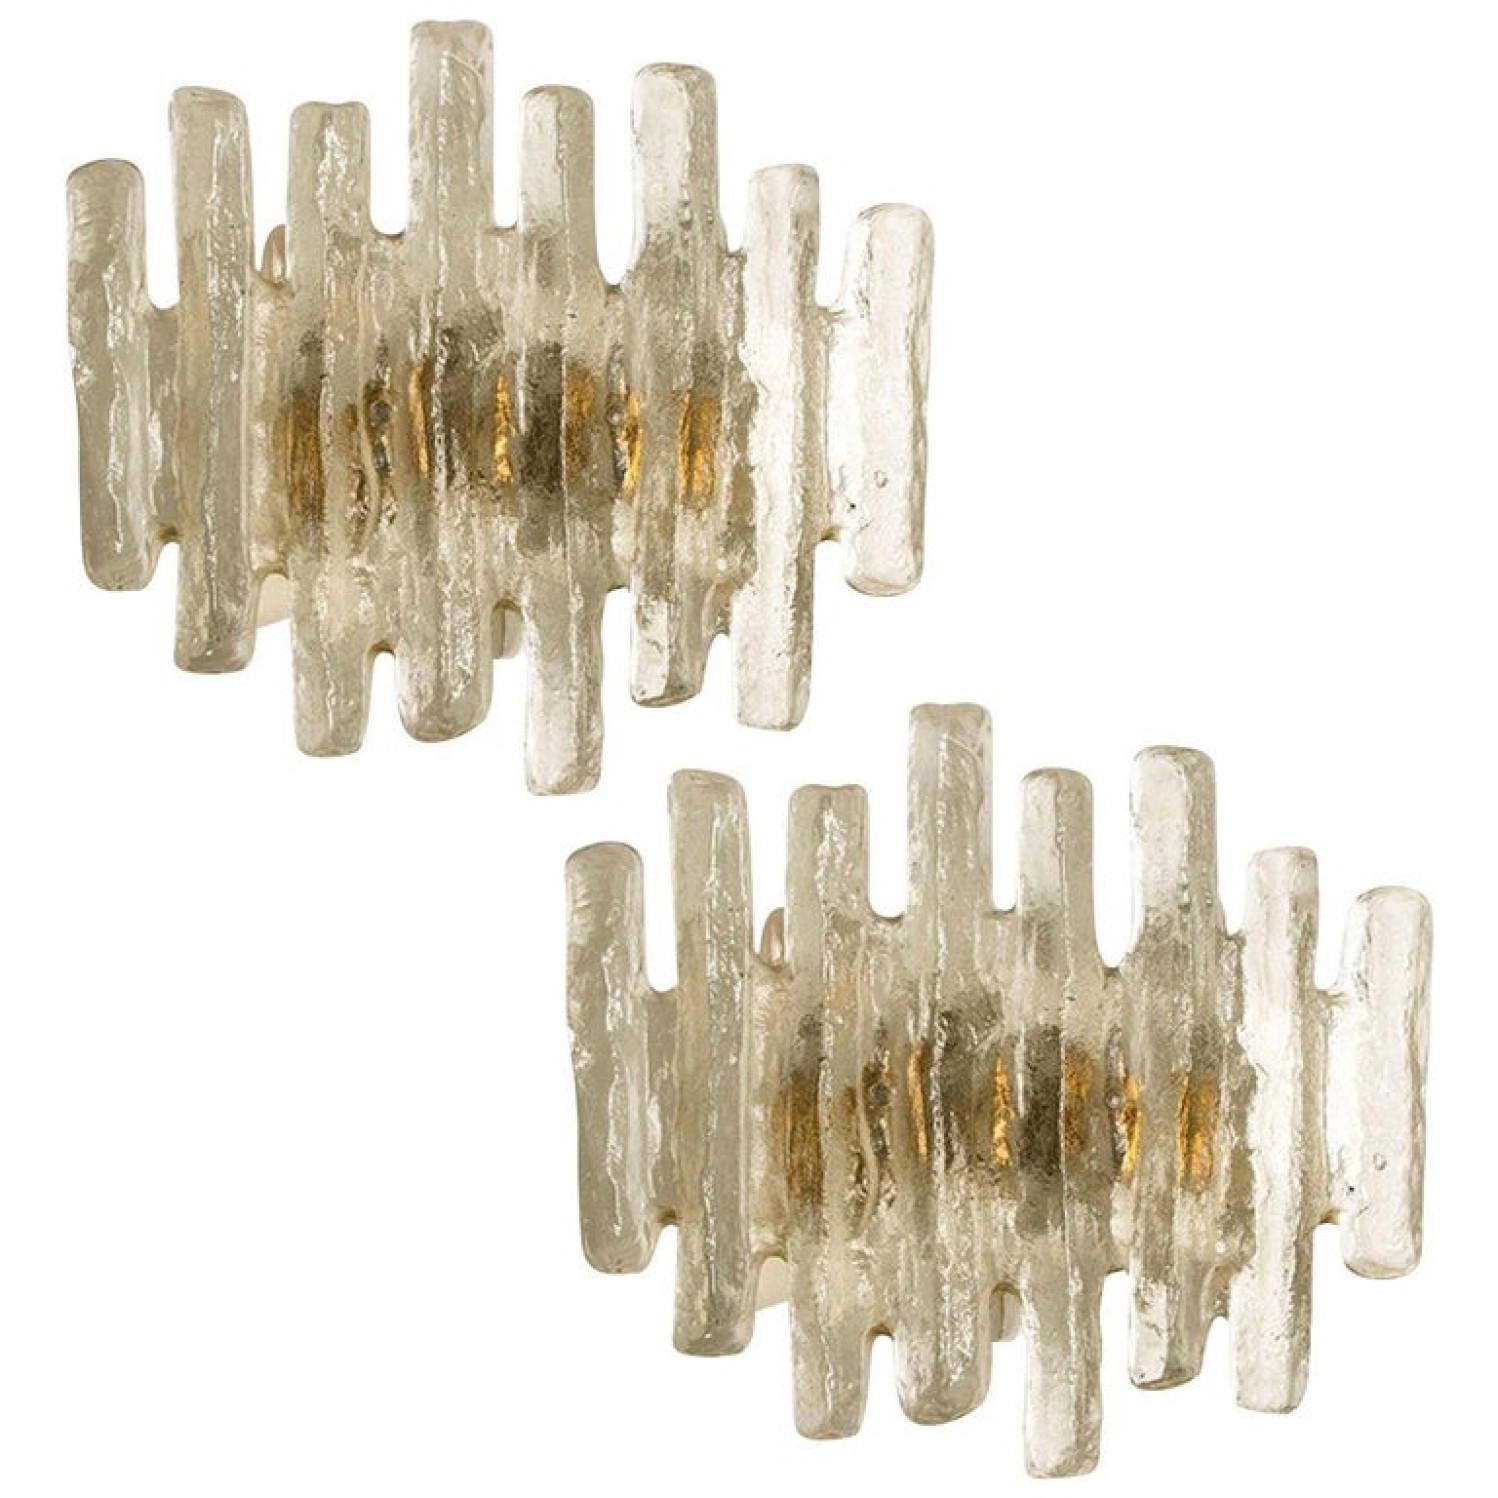 Pair of beautiful and elegant modern wall lights or sconces, manufactured by J.T. Kalmar Austria in the 1970s. Lovely design, executed to a very high standard.

Each wall light has 1 large solid ice glass sheets dangling on it. With a white back